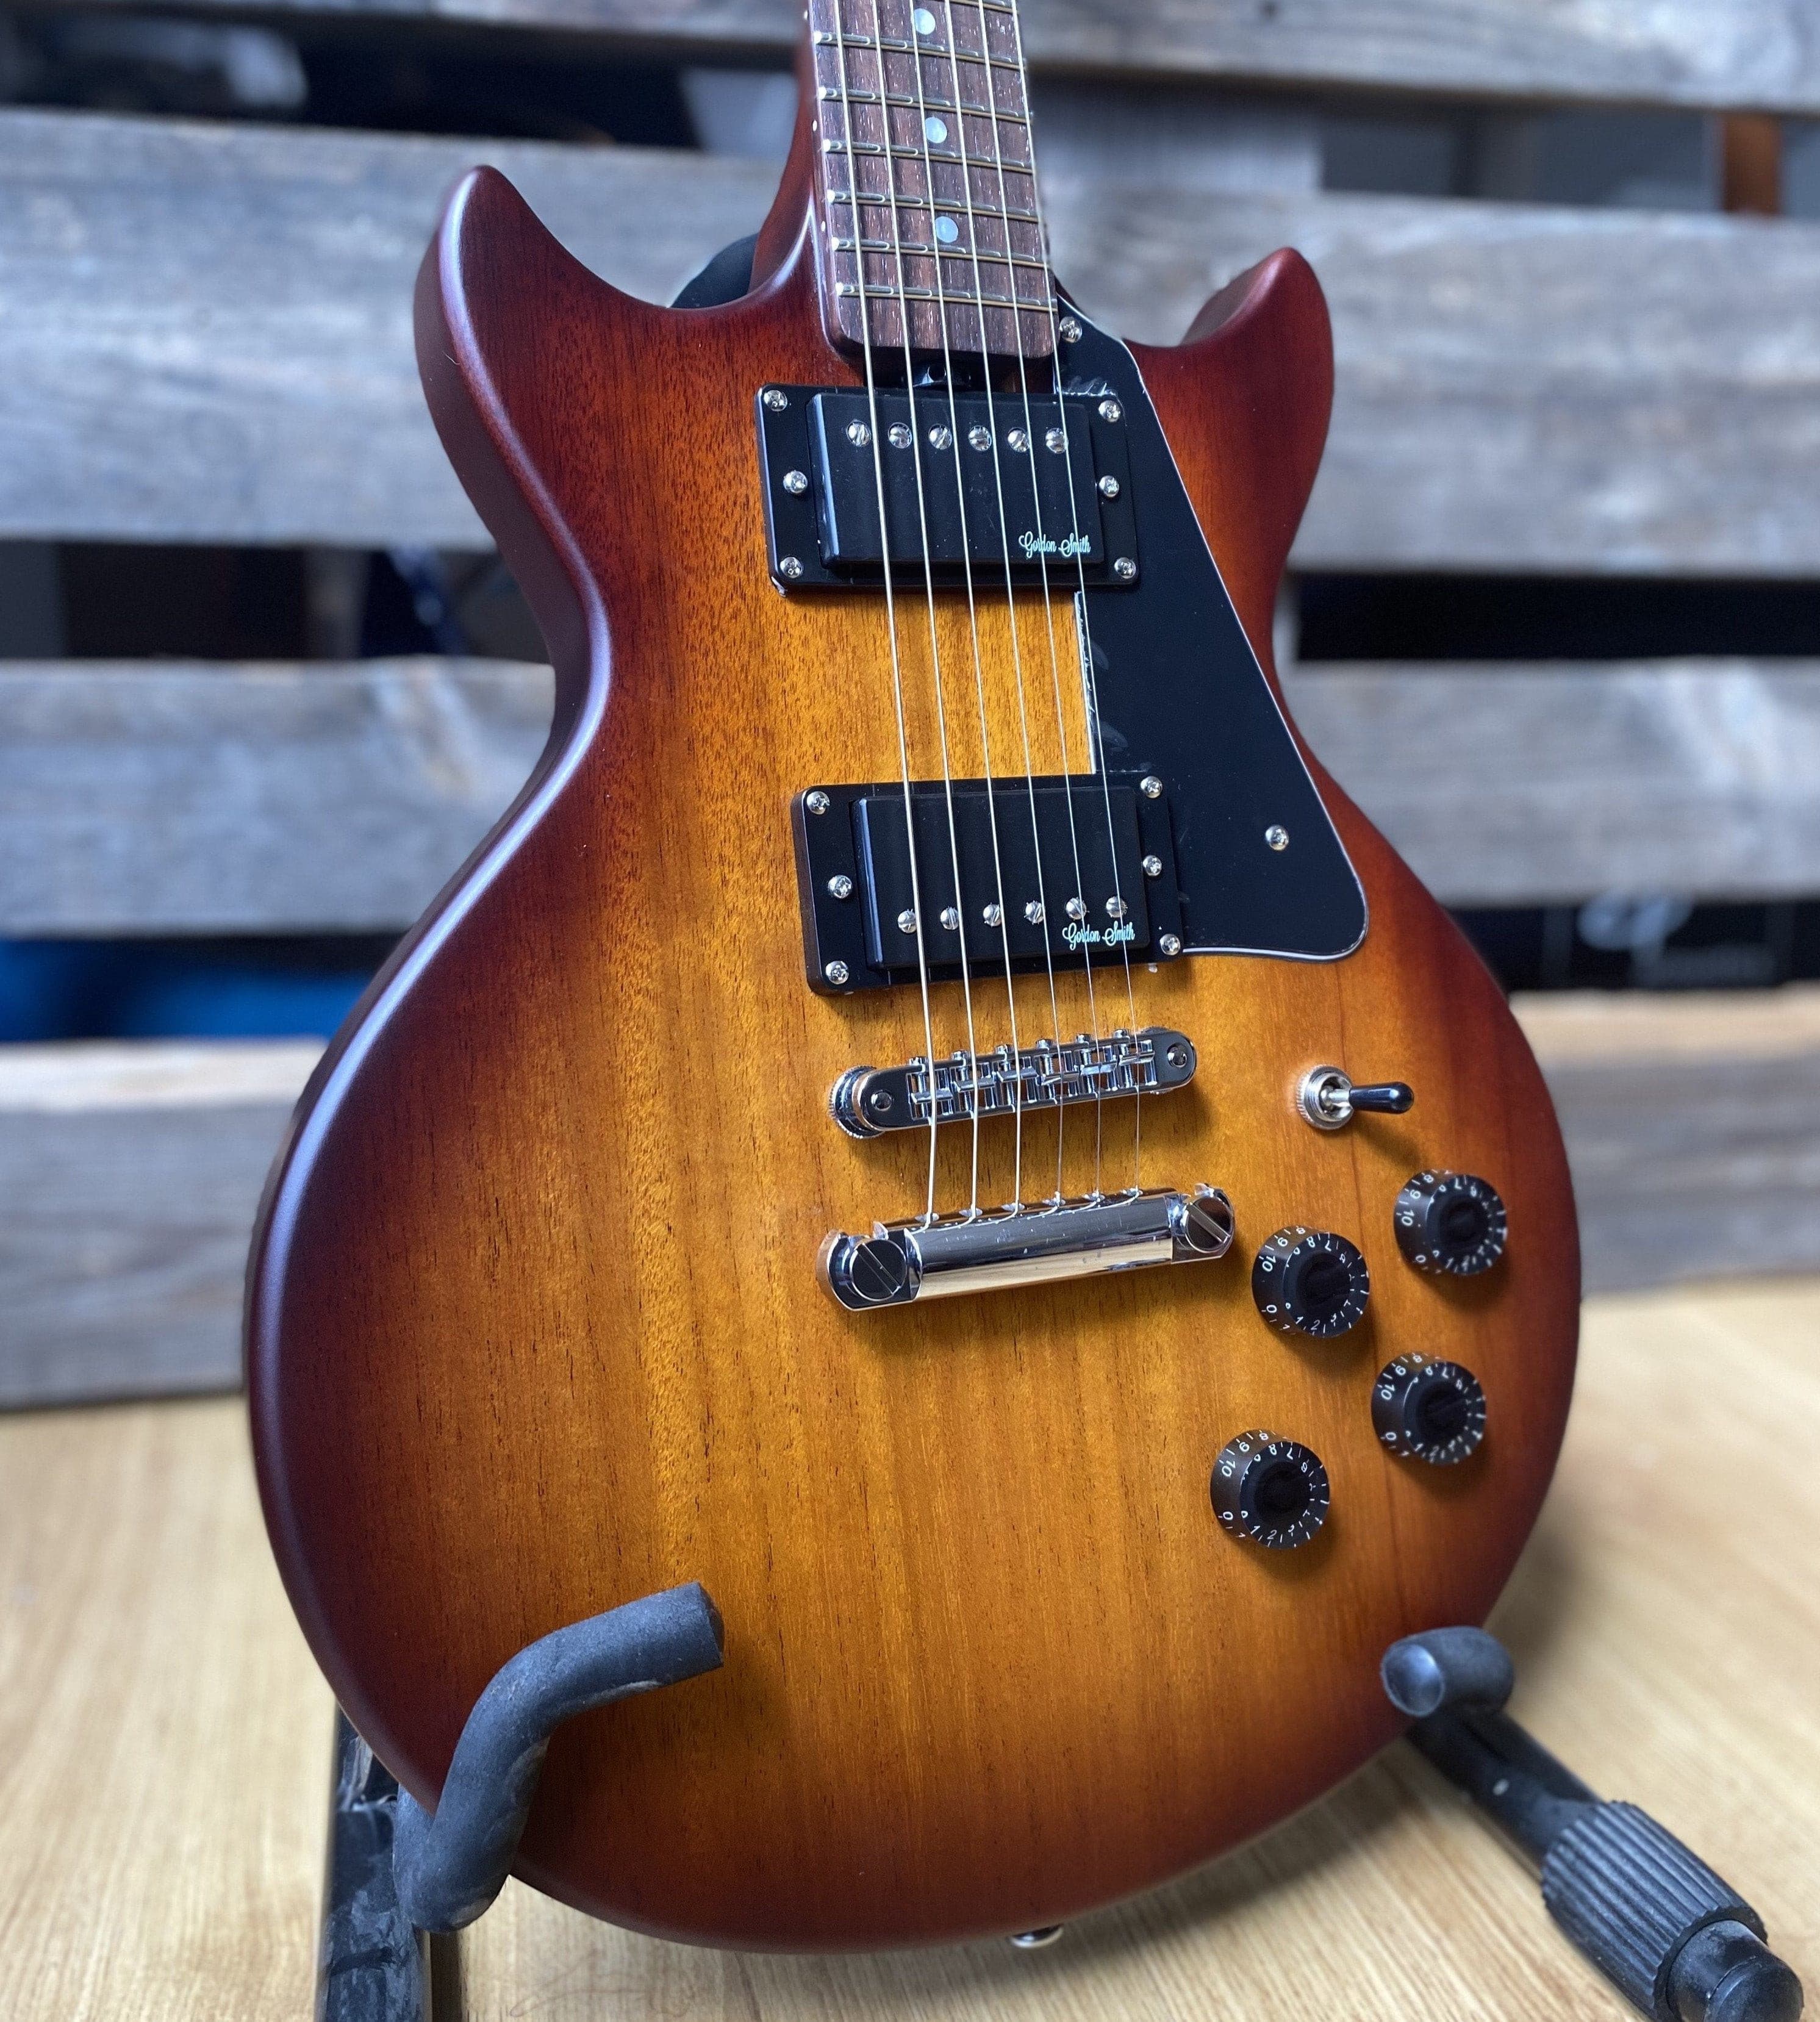 Copy of Gordon Smith GS2 Heritage Thick Body Full Mahogany (DAMAGED), Electric Guitar for sale at Richards Guitars.